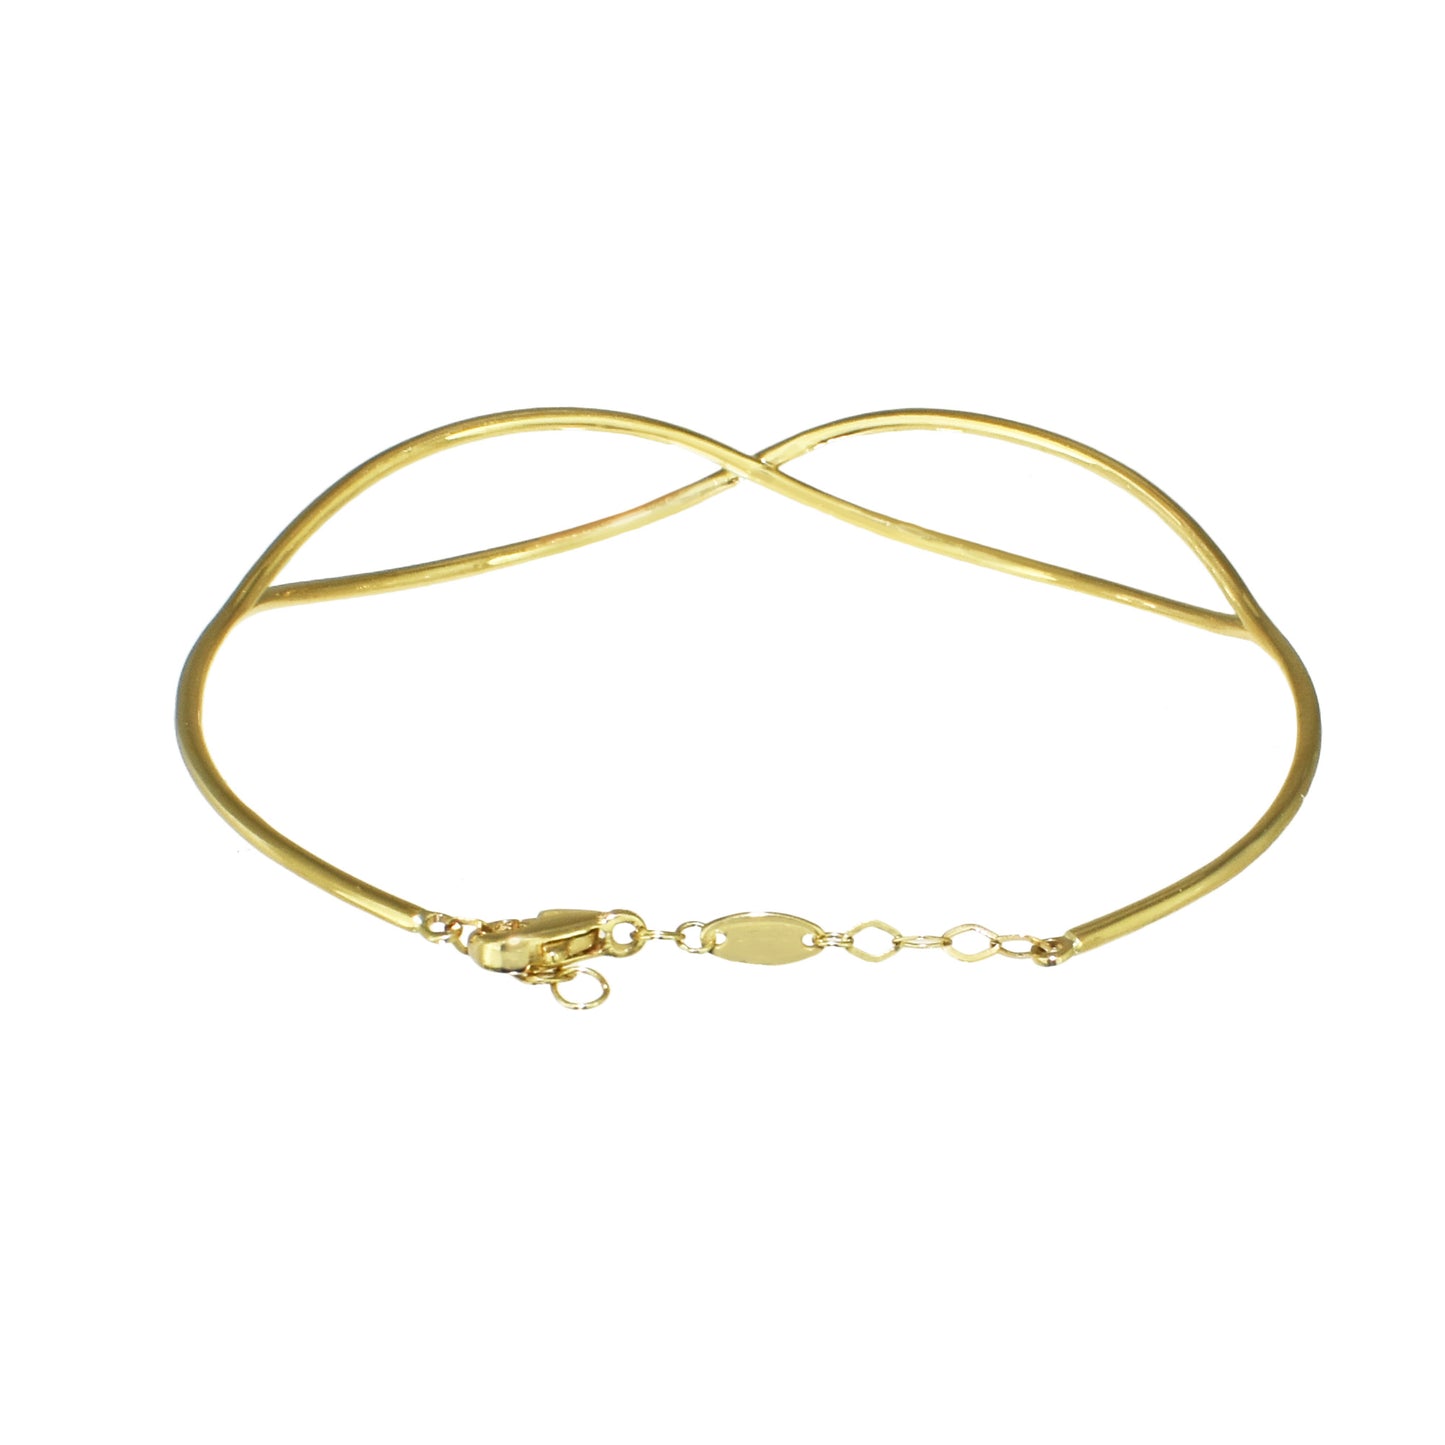 Séchic 14k Wire Intertwined Bangle with Lobster Closure 7.5"